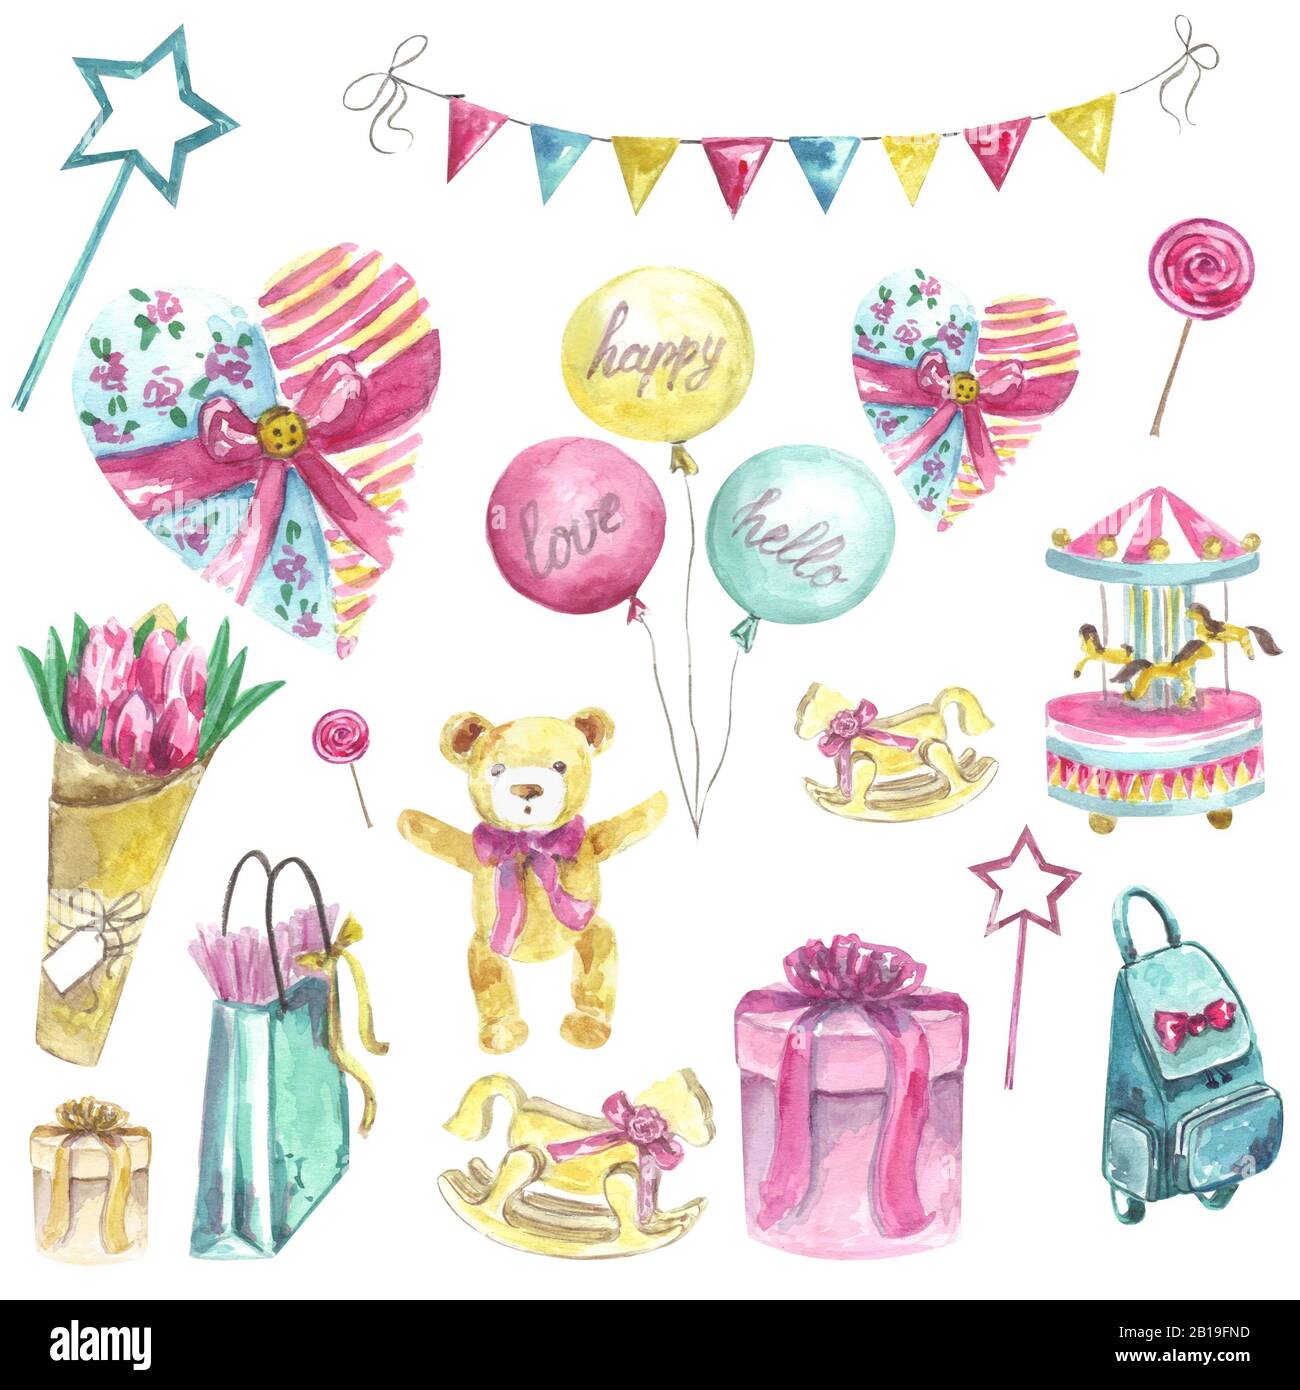 Colorful Birthday celebration with the balloons clipart free image